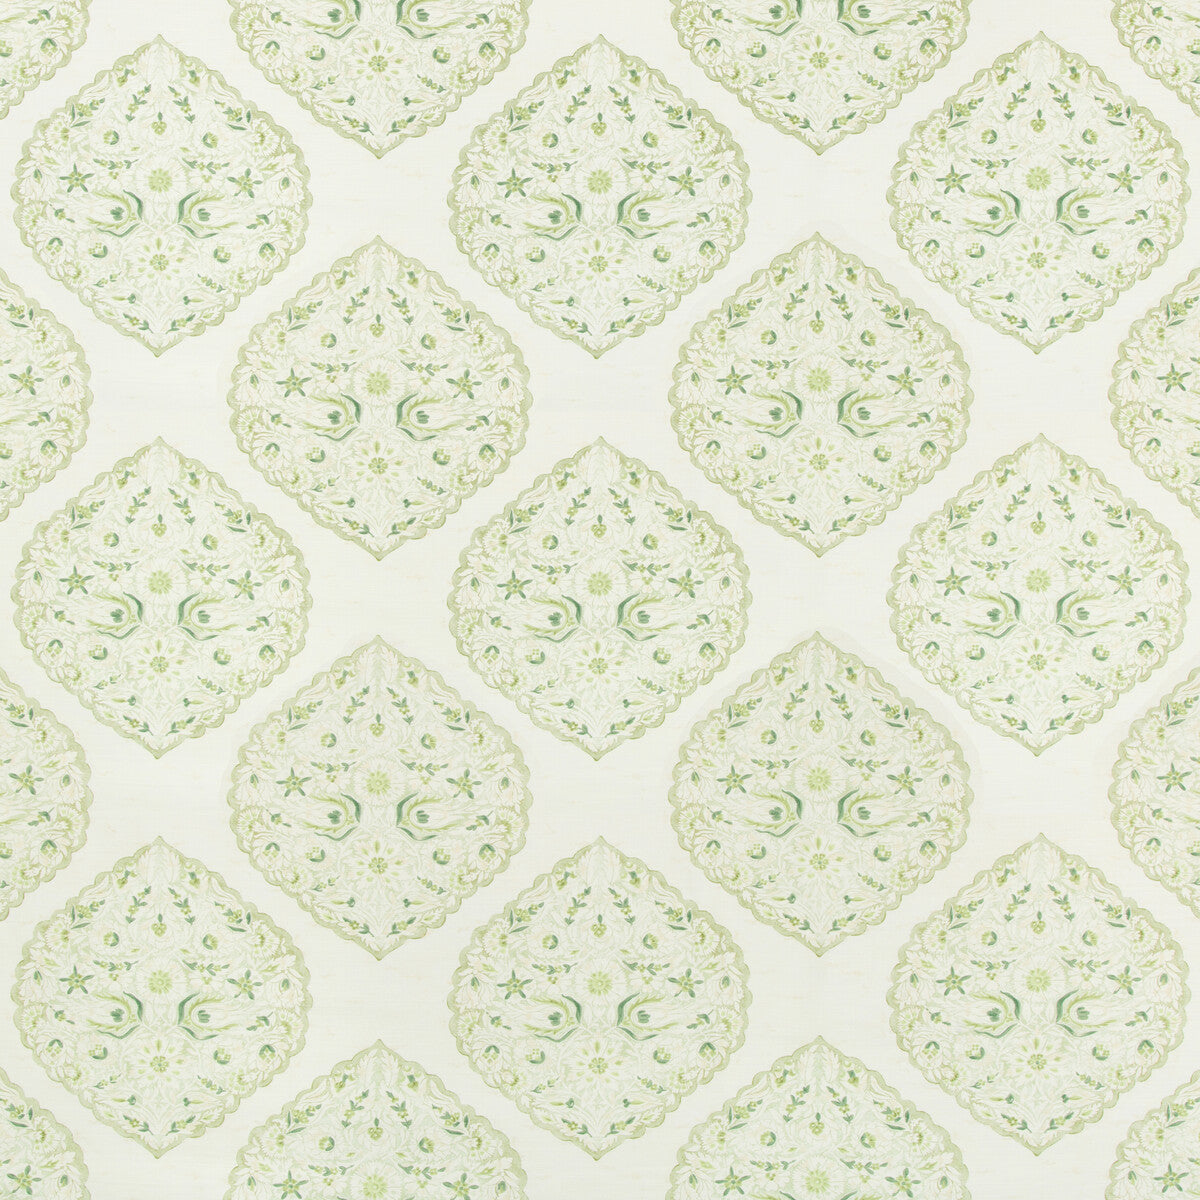 Lido Print fabric in leaf color - pattern 2017165.3.0 - by Lee Jofa in the Westport collection